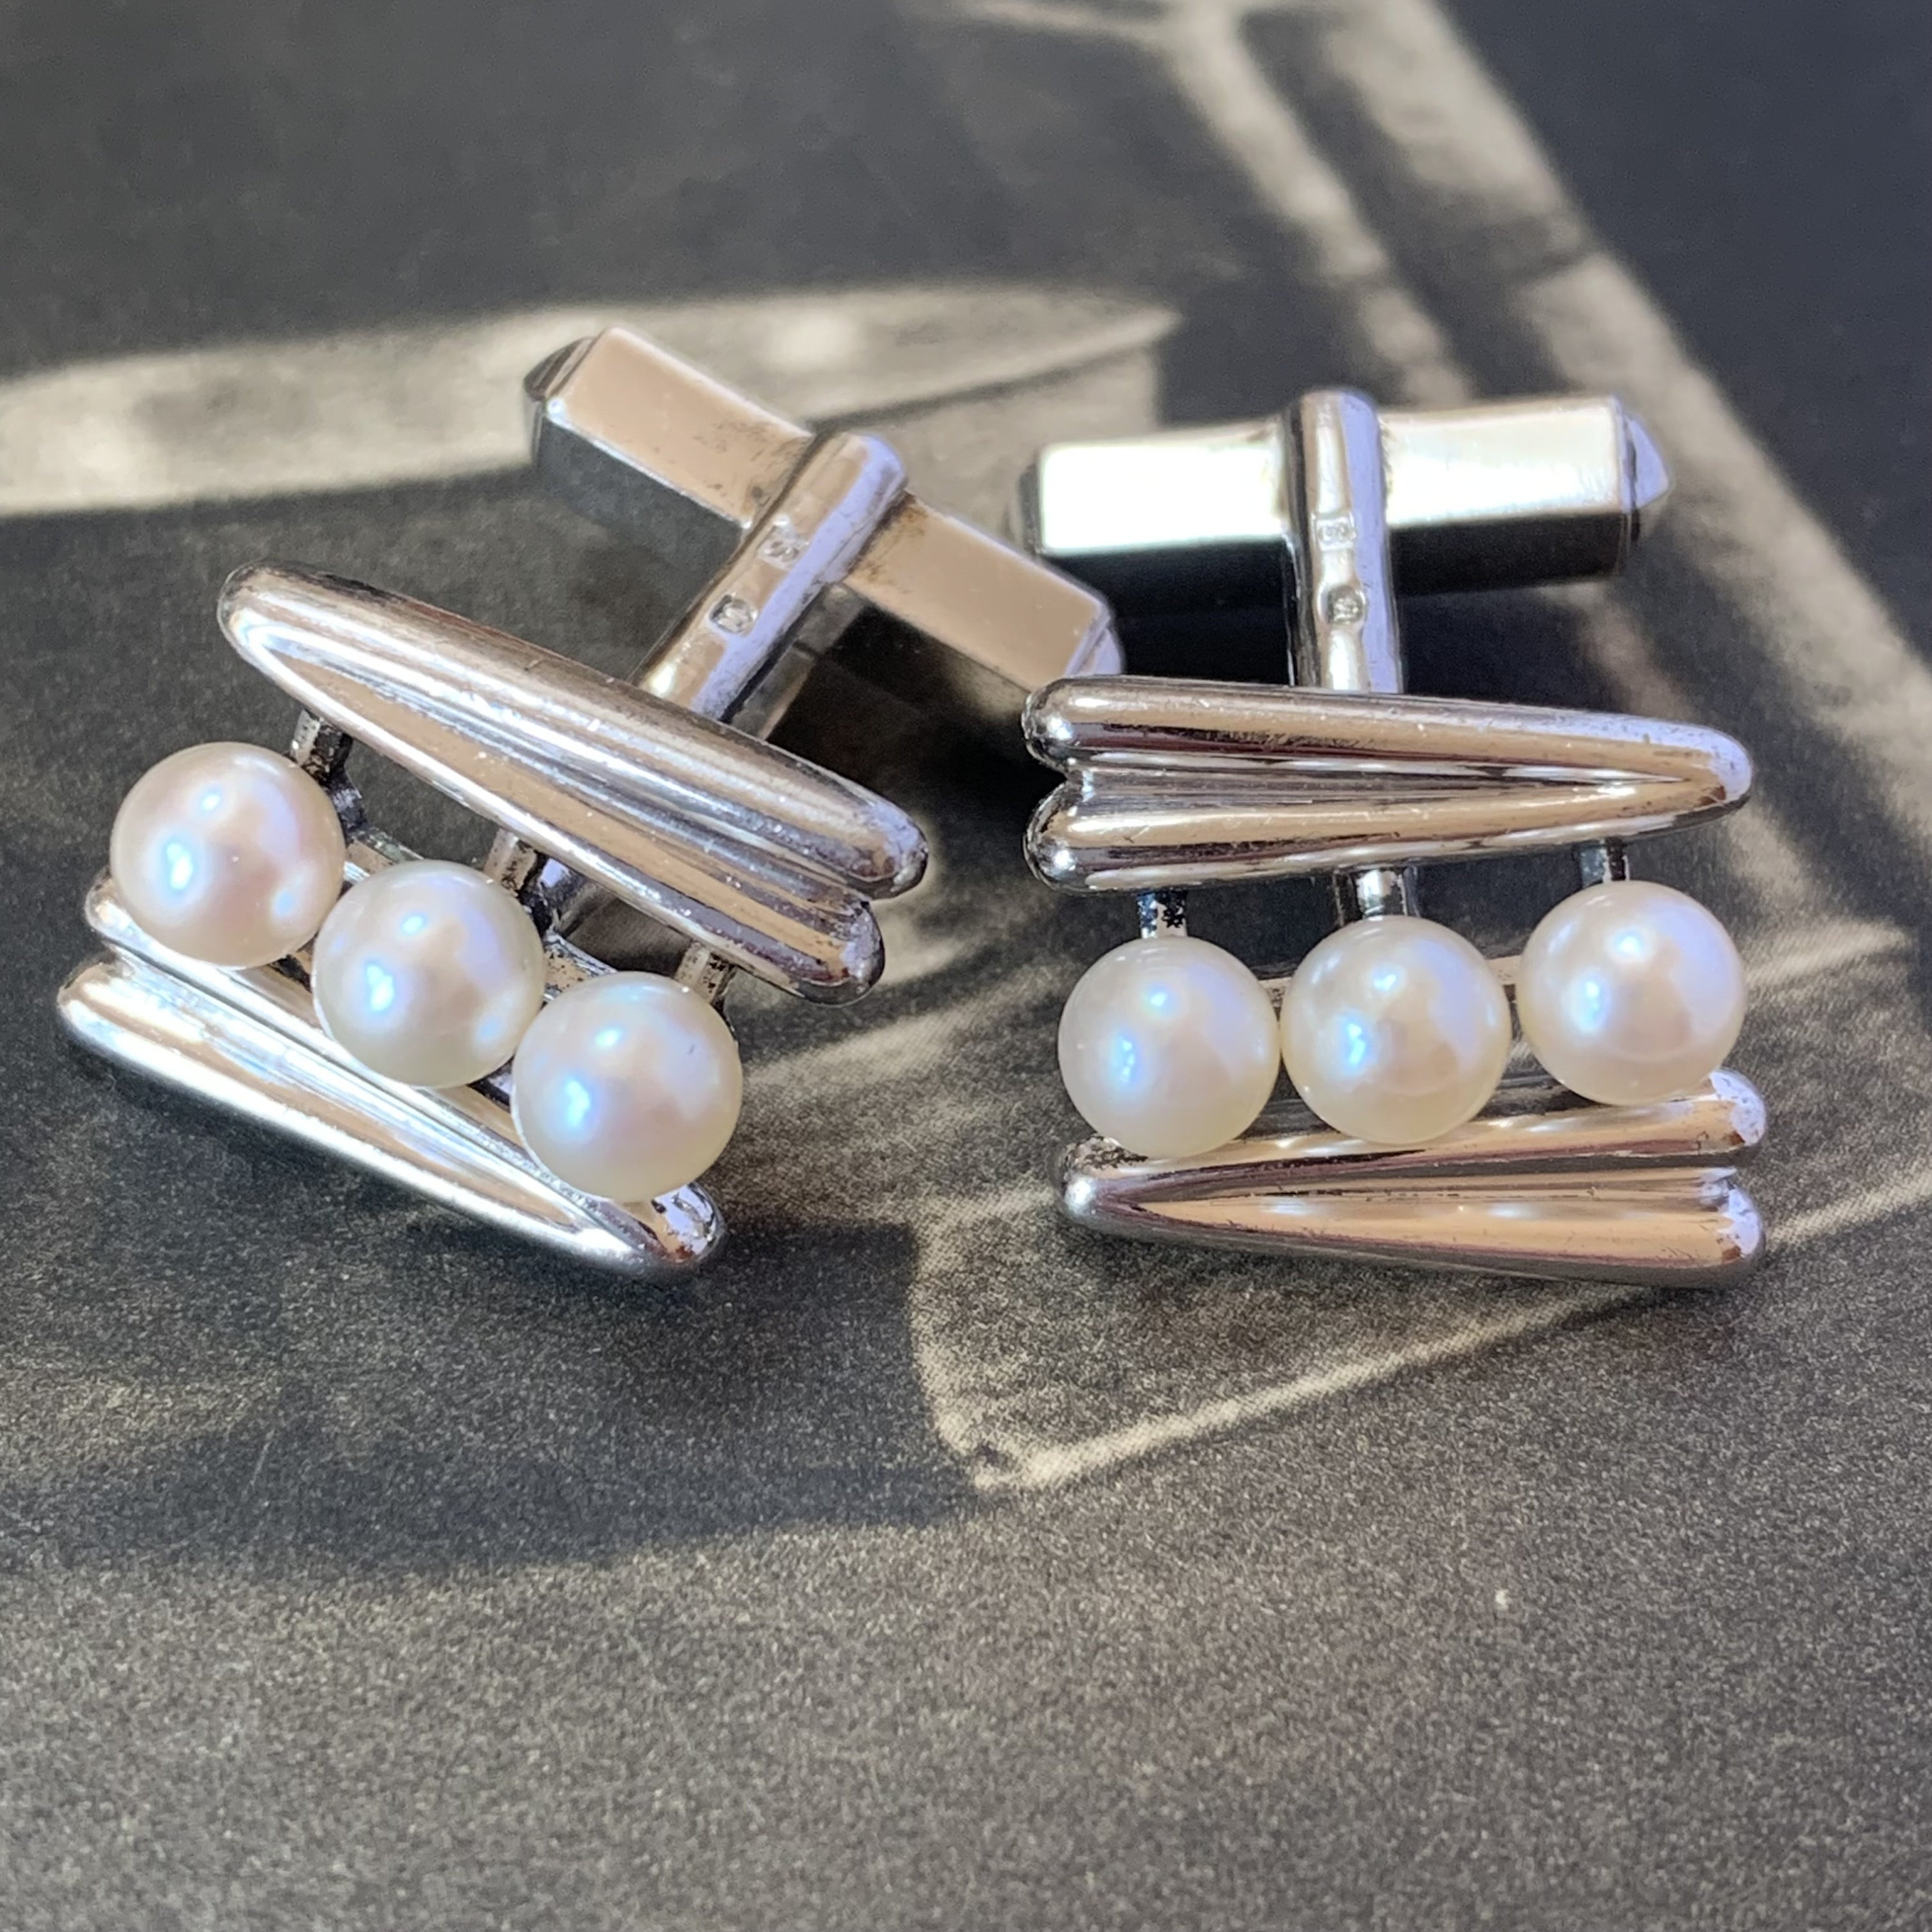 Mikimoto Pearl Cufflinks. Fantastic 4.5mm Akoya Pearls Mounted On Solid Silver